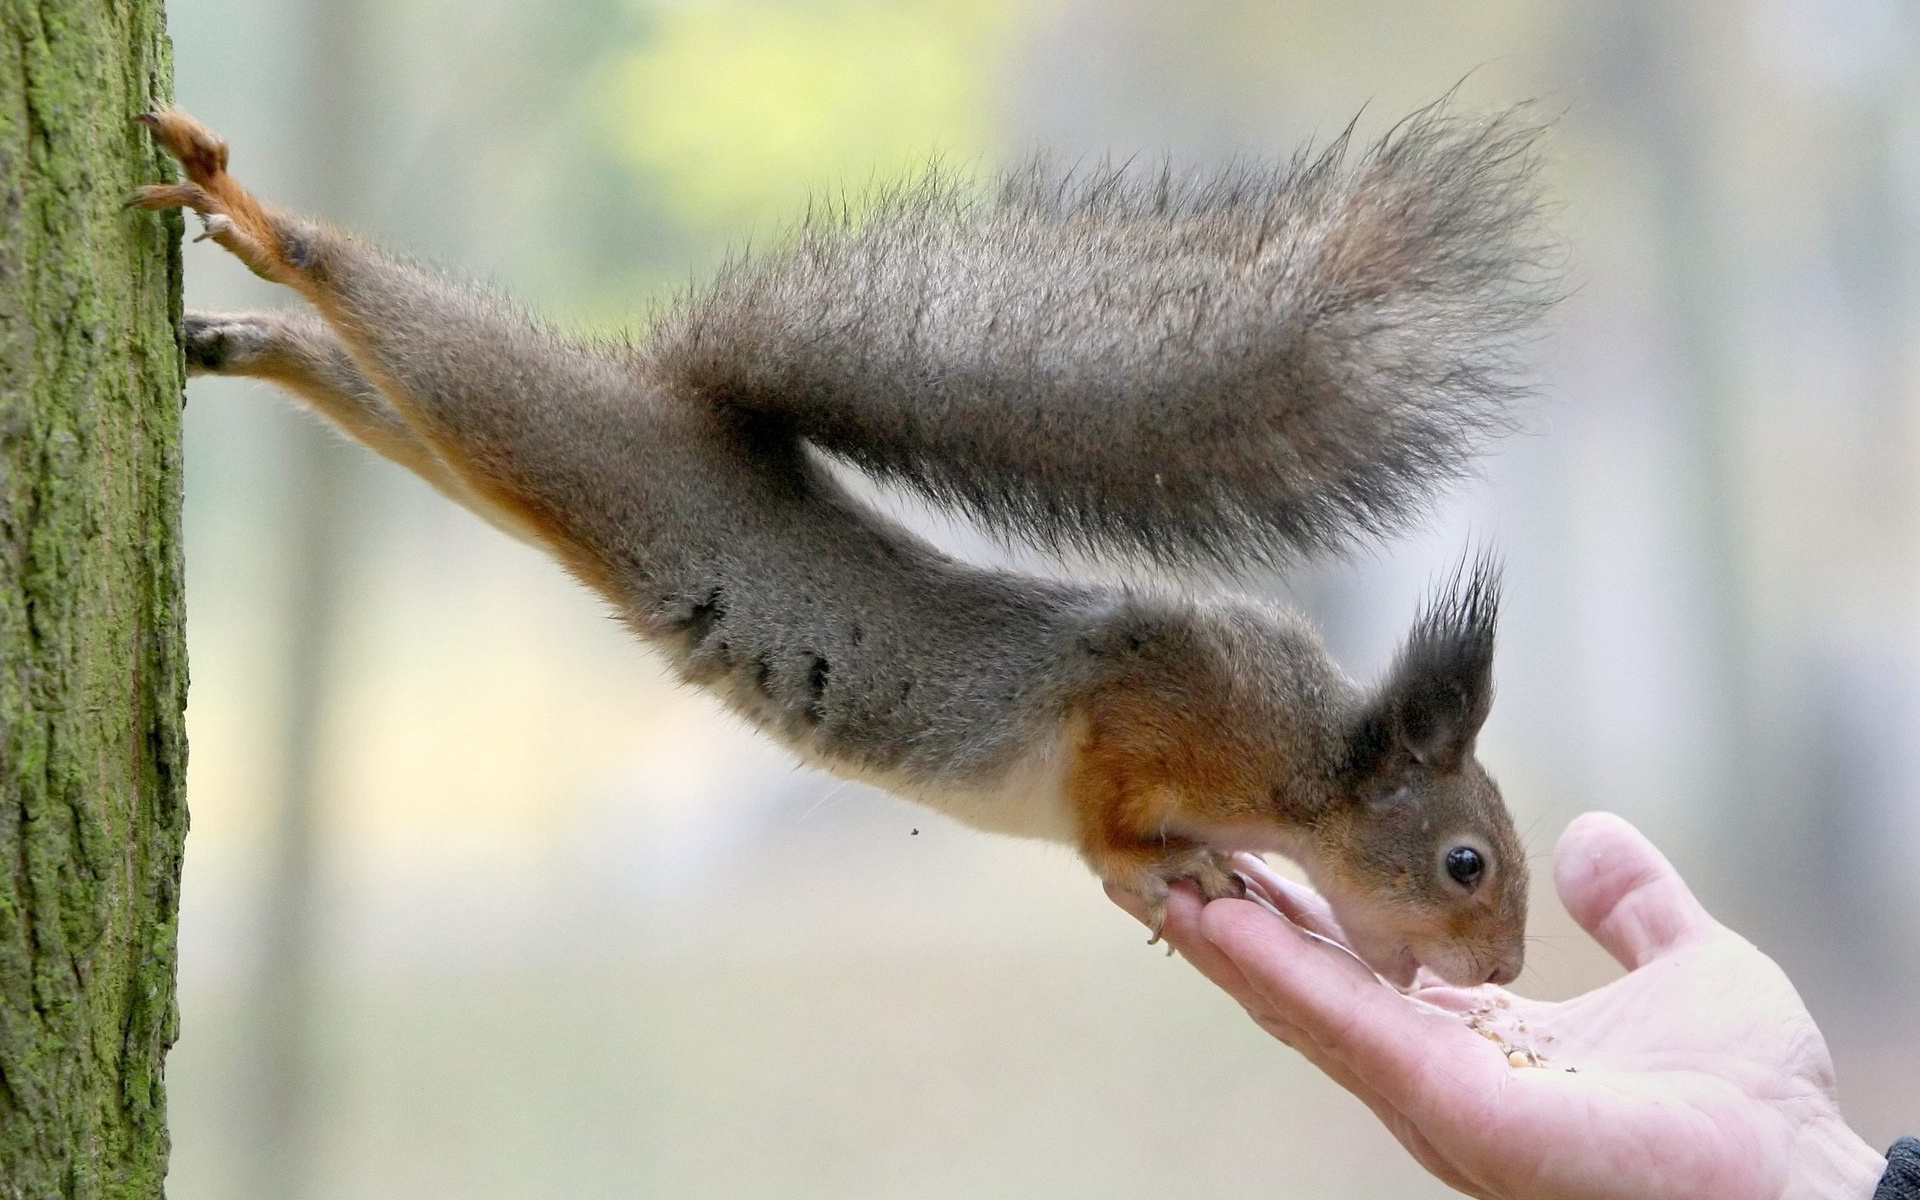 squirrels, Rodents, Hands, People, Humor, Funny, Feet, Paws Wallpaper